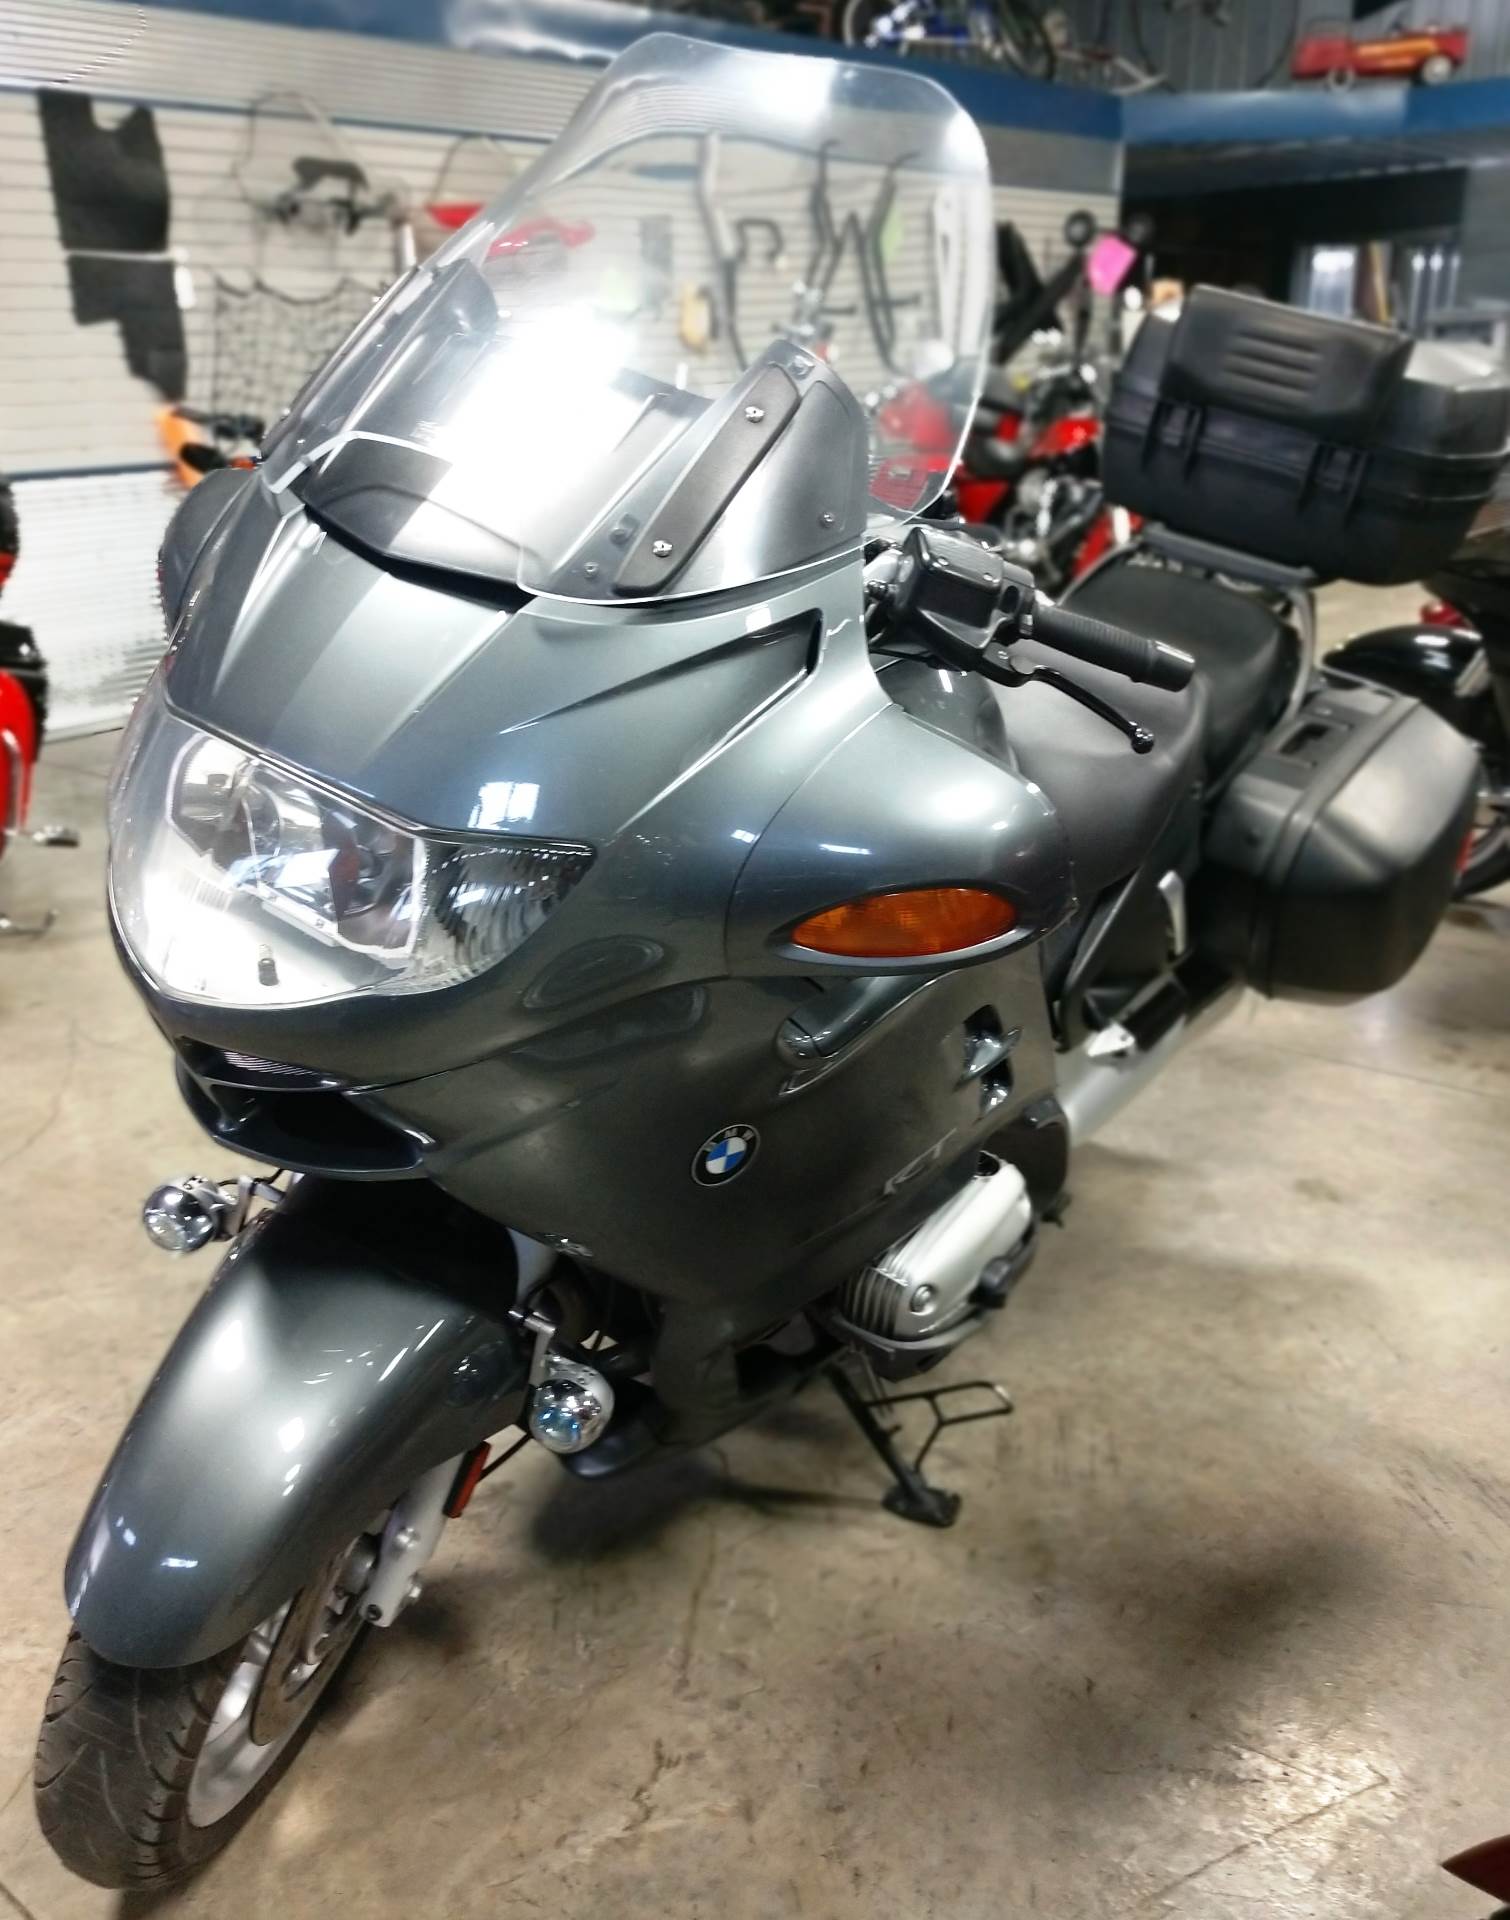 Used 2004 BMW R 1150 RT (ABS) Motorcycles in Ottumwa, IA